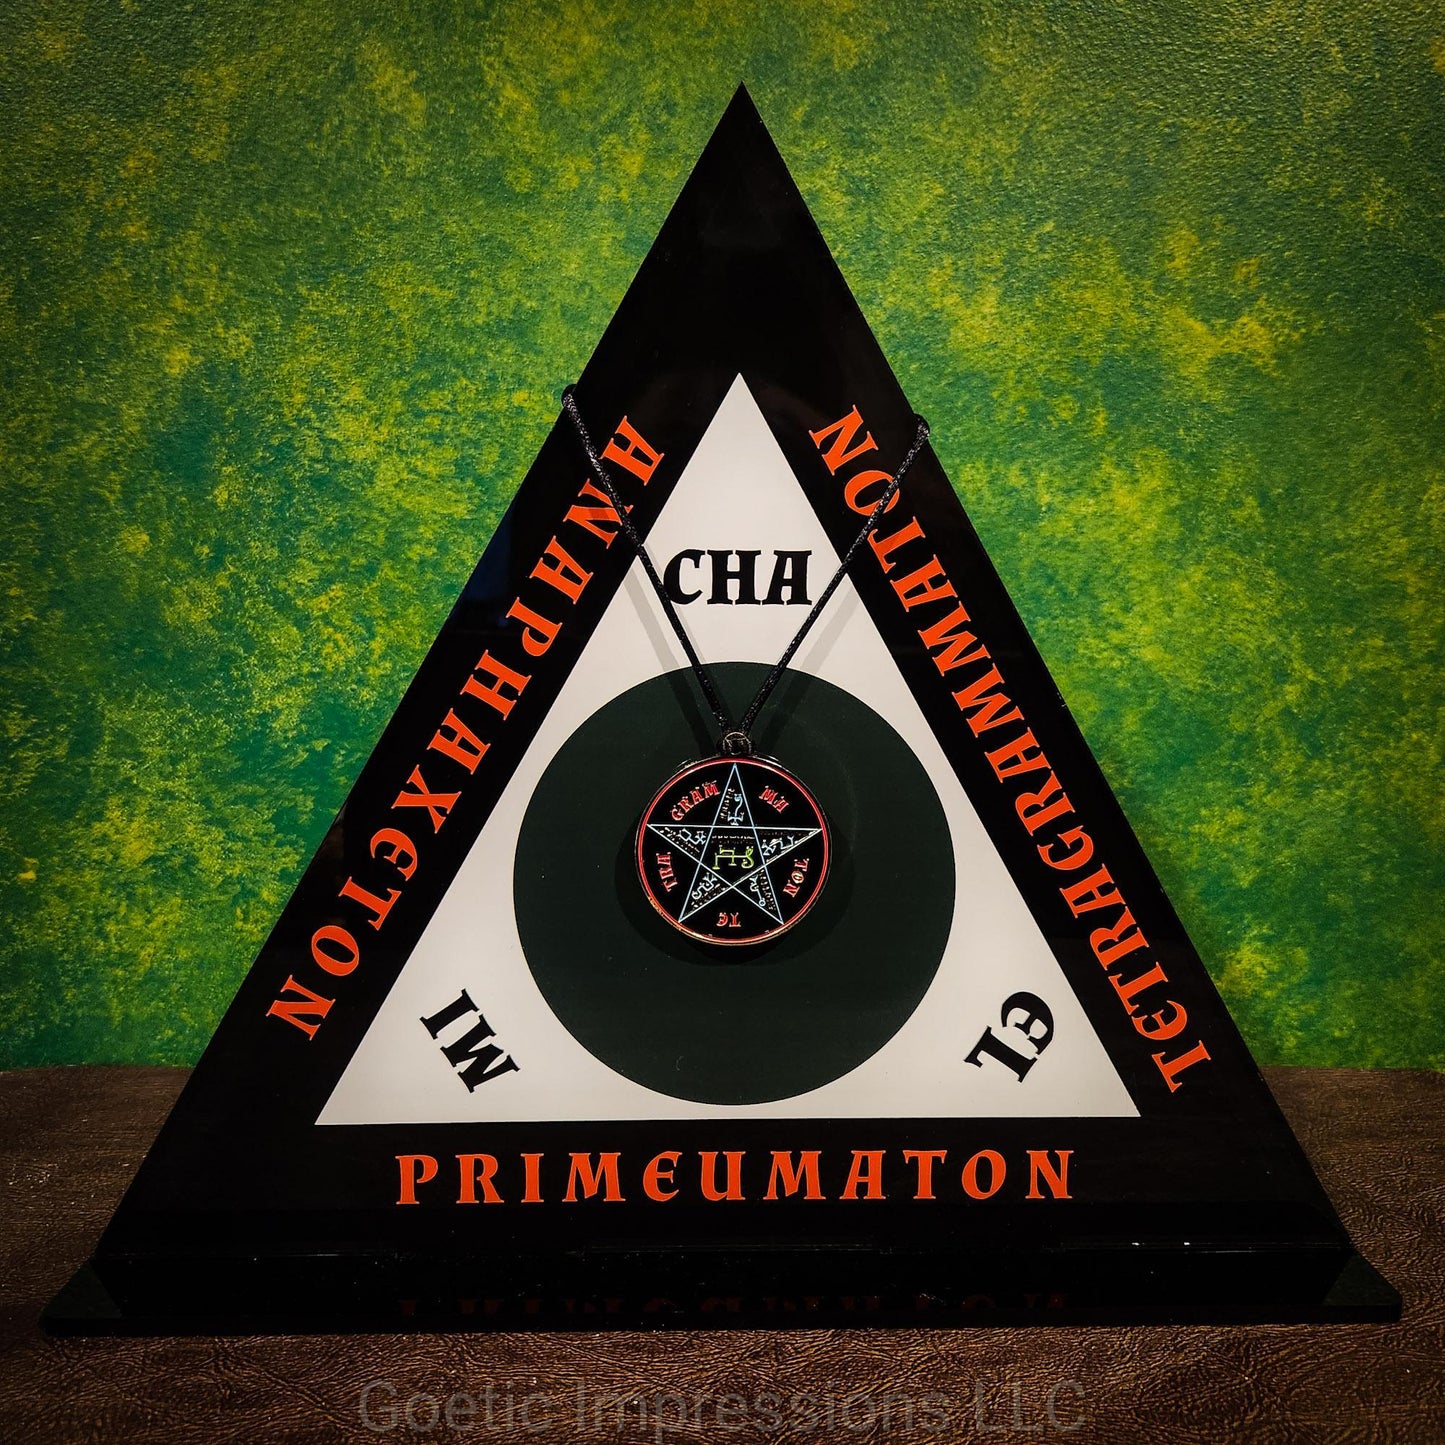 The Magickal Triangle of Solomon in full color with a Goetic necklace hanging in the center.